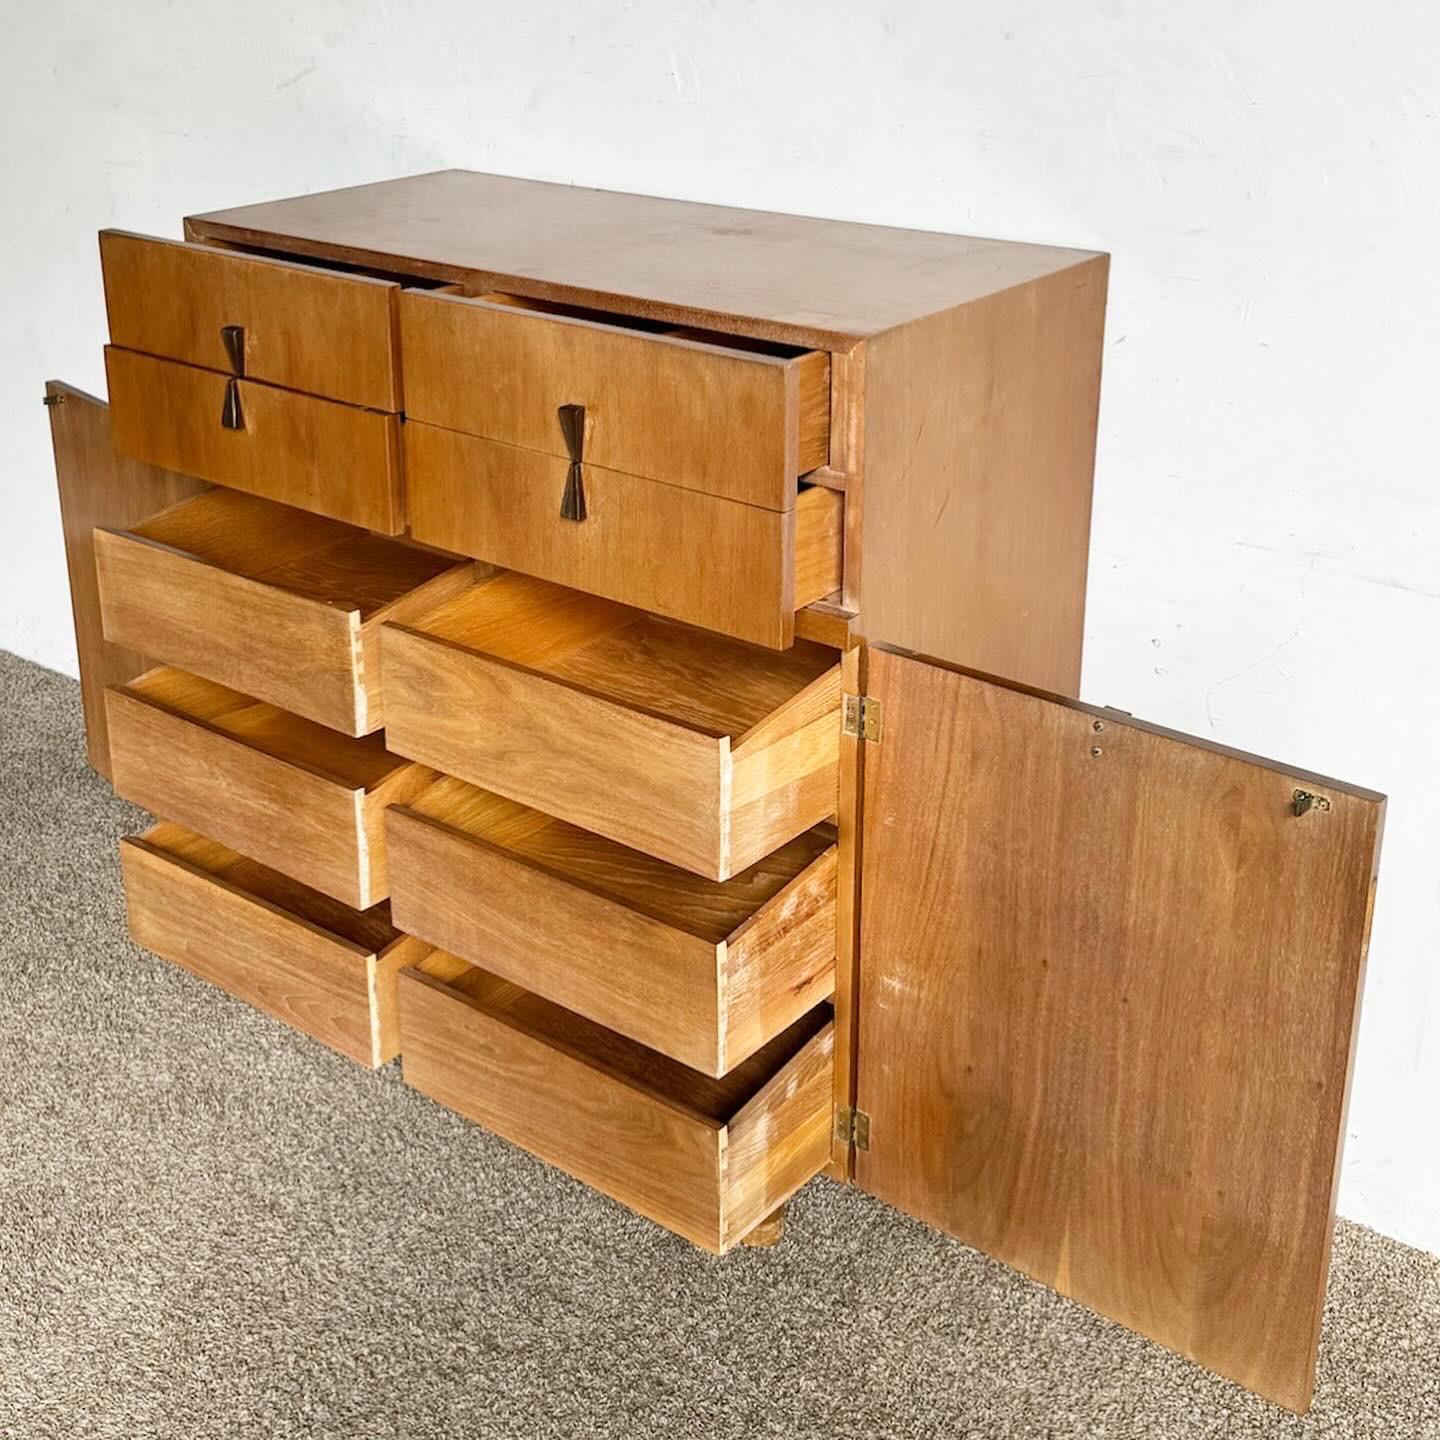 The Mid Century Modern Highboy Dresser by American of Martinsville is a perfect addition to any home, blending sleek design with functional storage. This tall dresser features clean lines and a streamlined profile, offering ample space in a compact